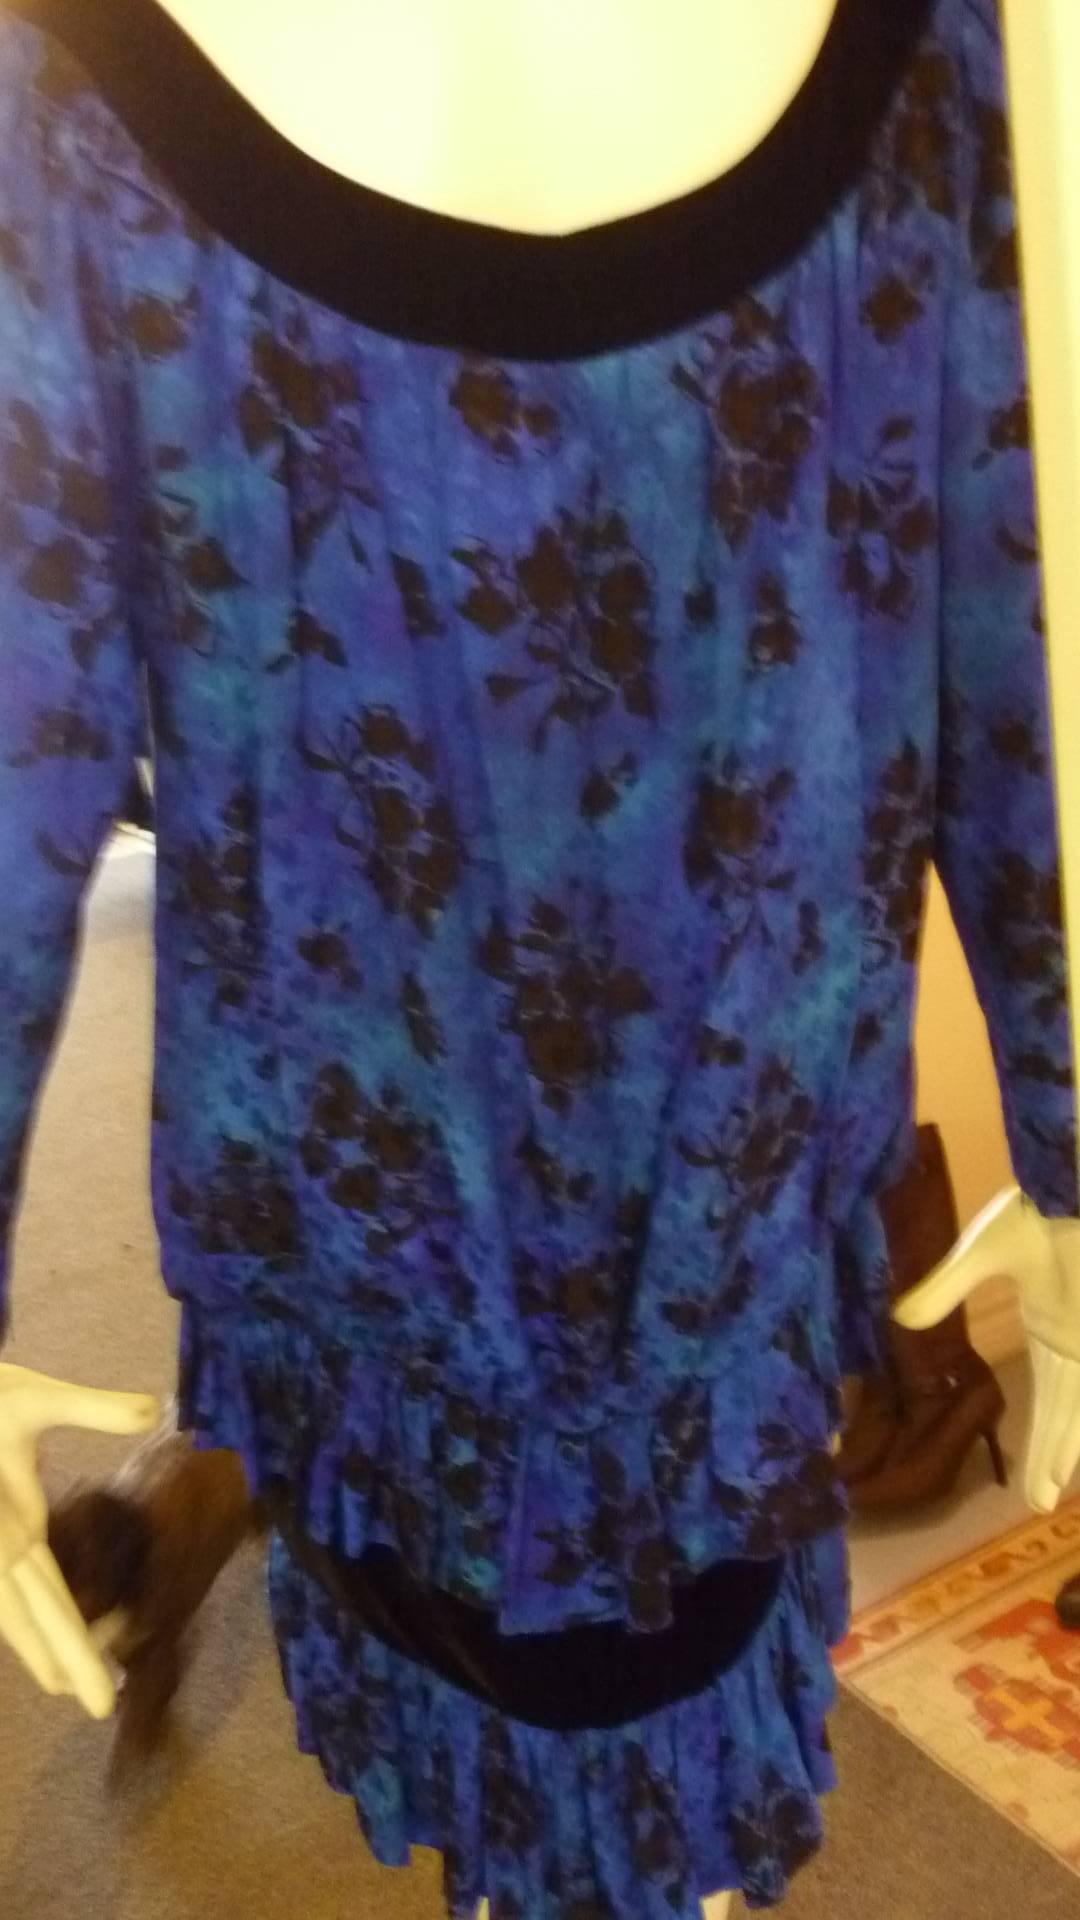 Typical of Yves Saint Laurent's 1980s style, this silk dress is in a lovely iridescent blue with a black floral print. There is a black velvet trim on the collar as well as a velvet panel on the skirt. The dress also features a dropped waist look